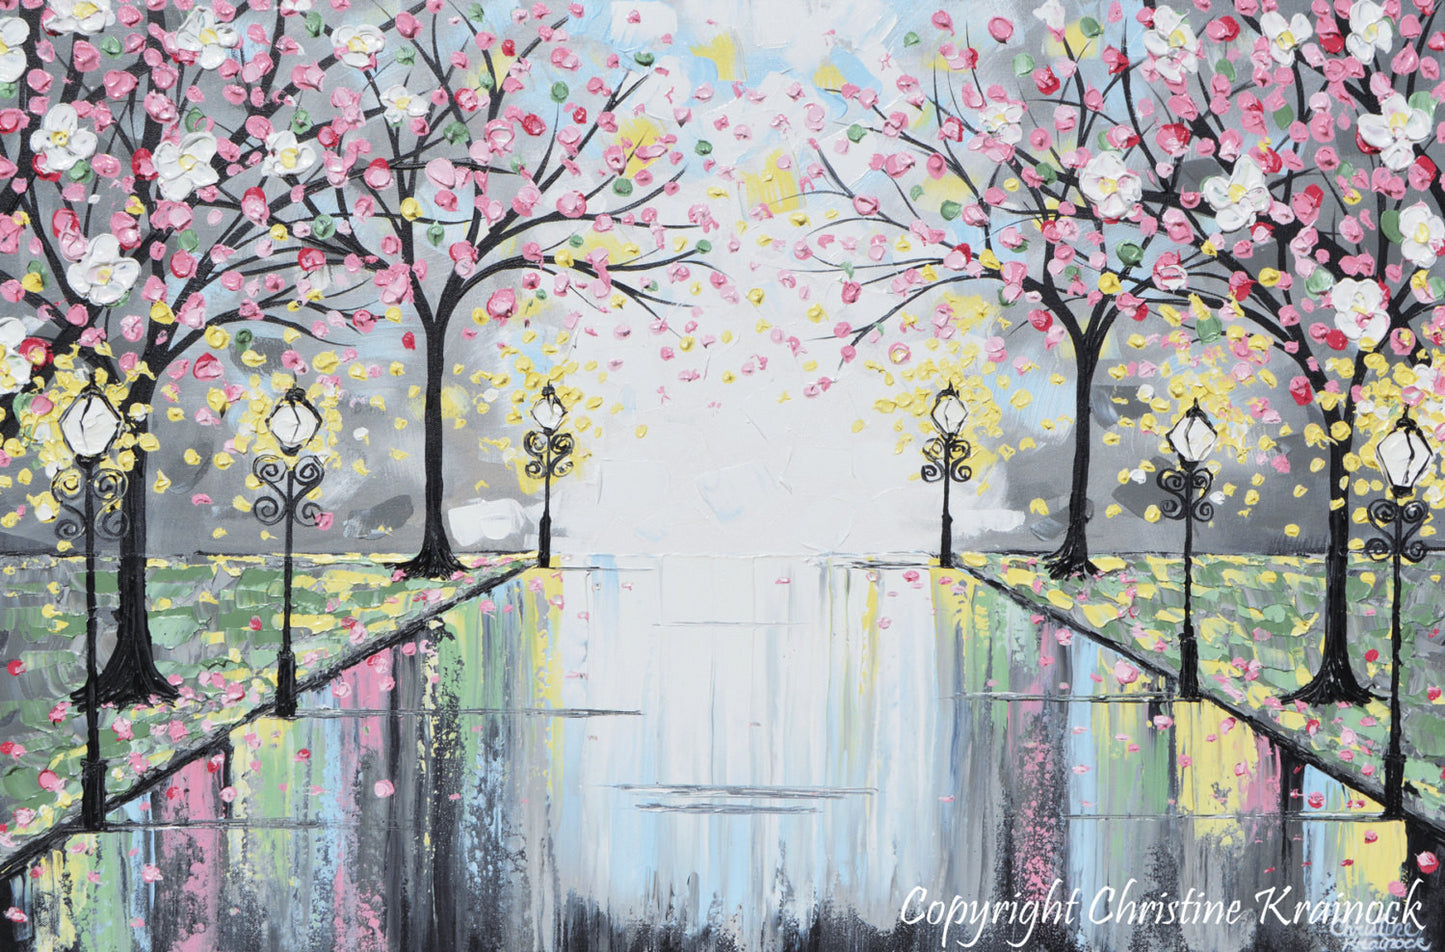 Load image into Gallery viewer, GICLEE PRINT Art Abstract Painting Pink Blossoming Cherry Trees Park Flowers Canvas Prints Grey Decor - Christine Krainock Art - Contemporary Art by Christine - 3
